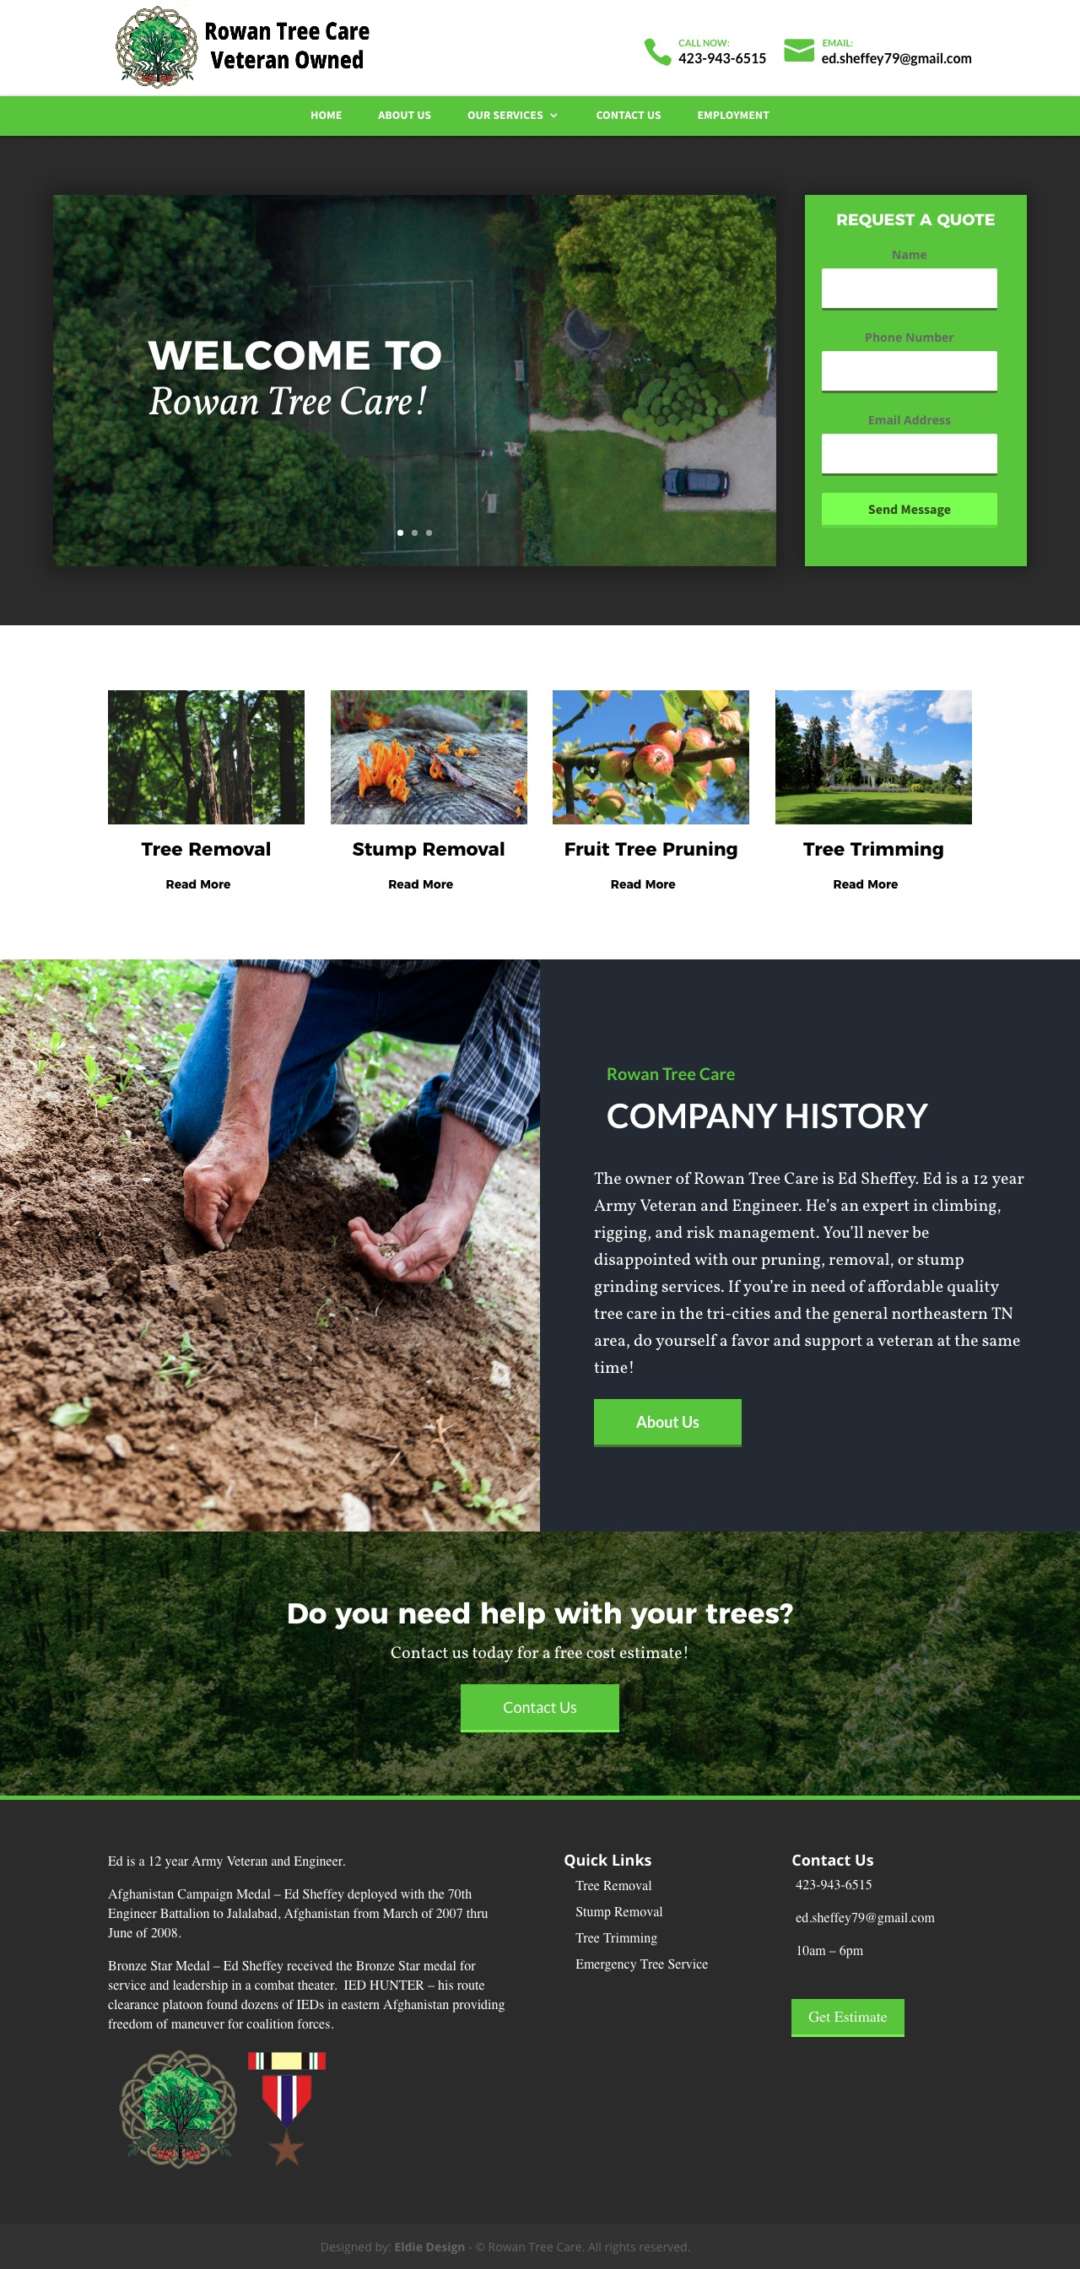 This is a photo of a website designed by Eldie Design, a Johnson City Web Design Company.